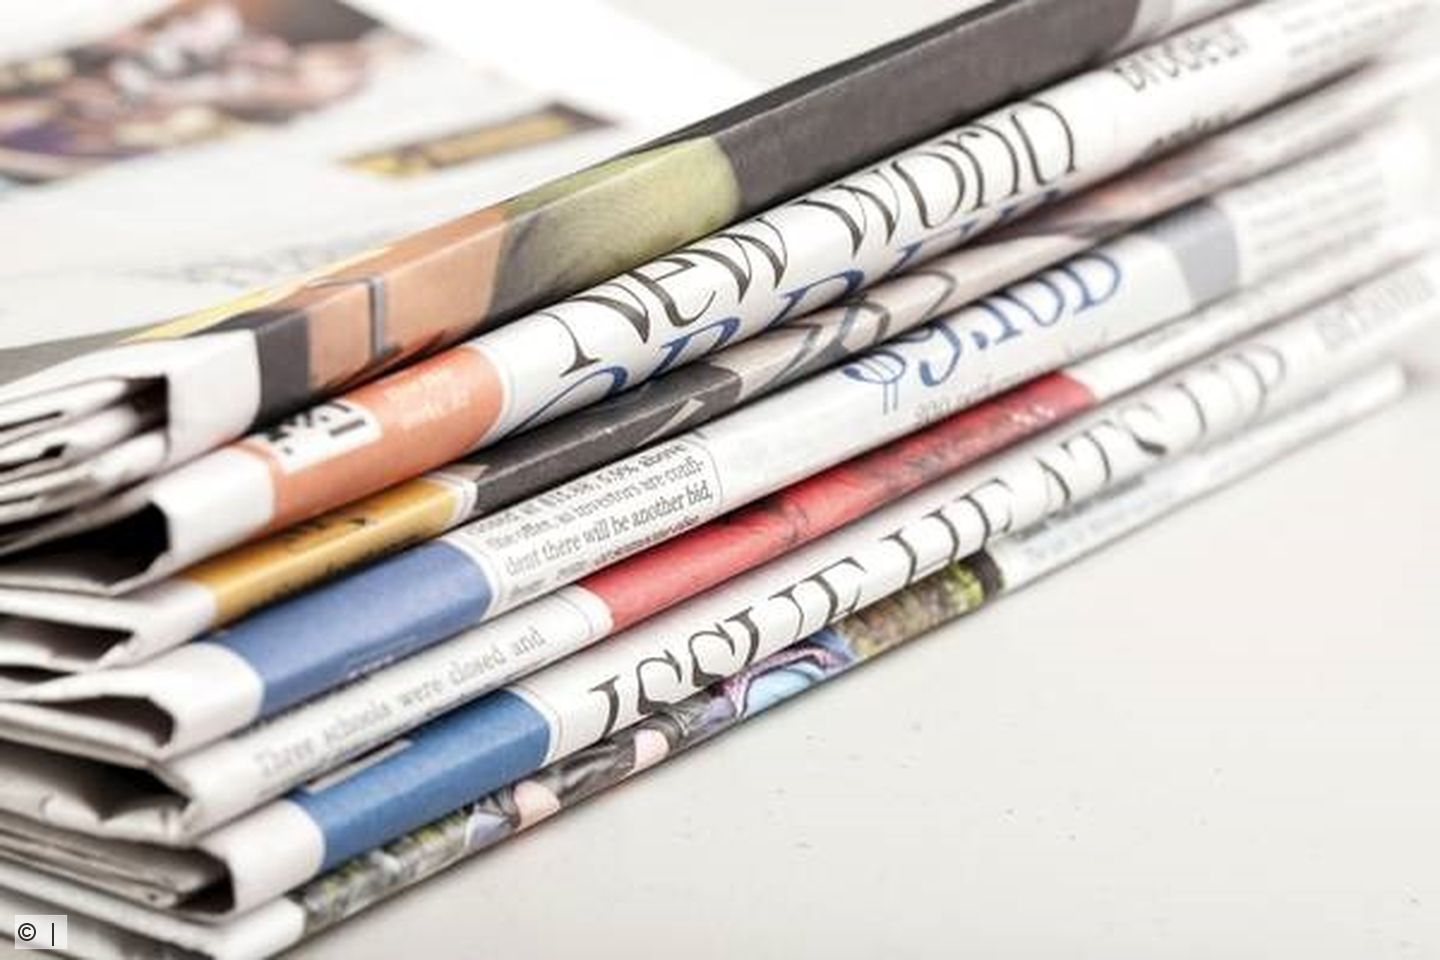 Sentiment in German printing and media industry improving